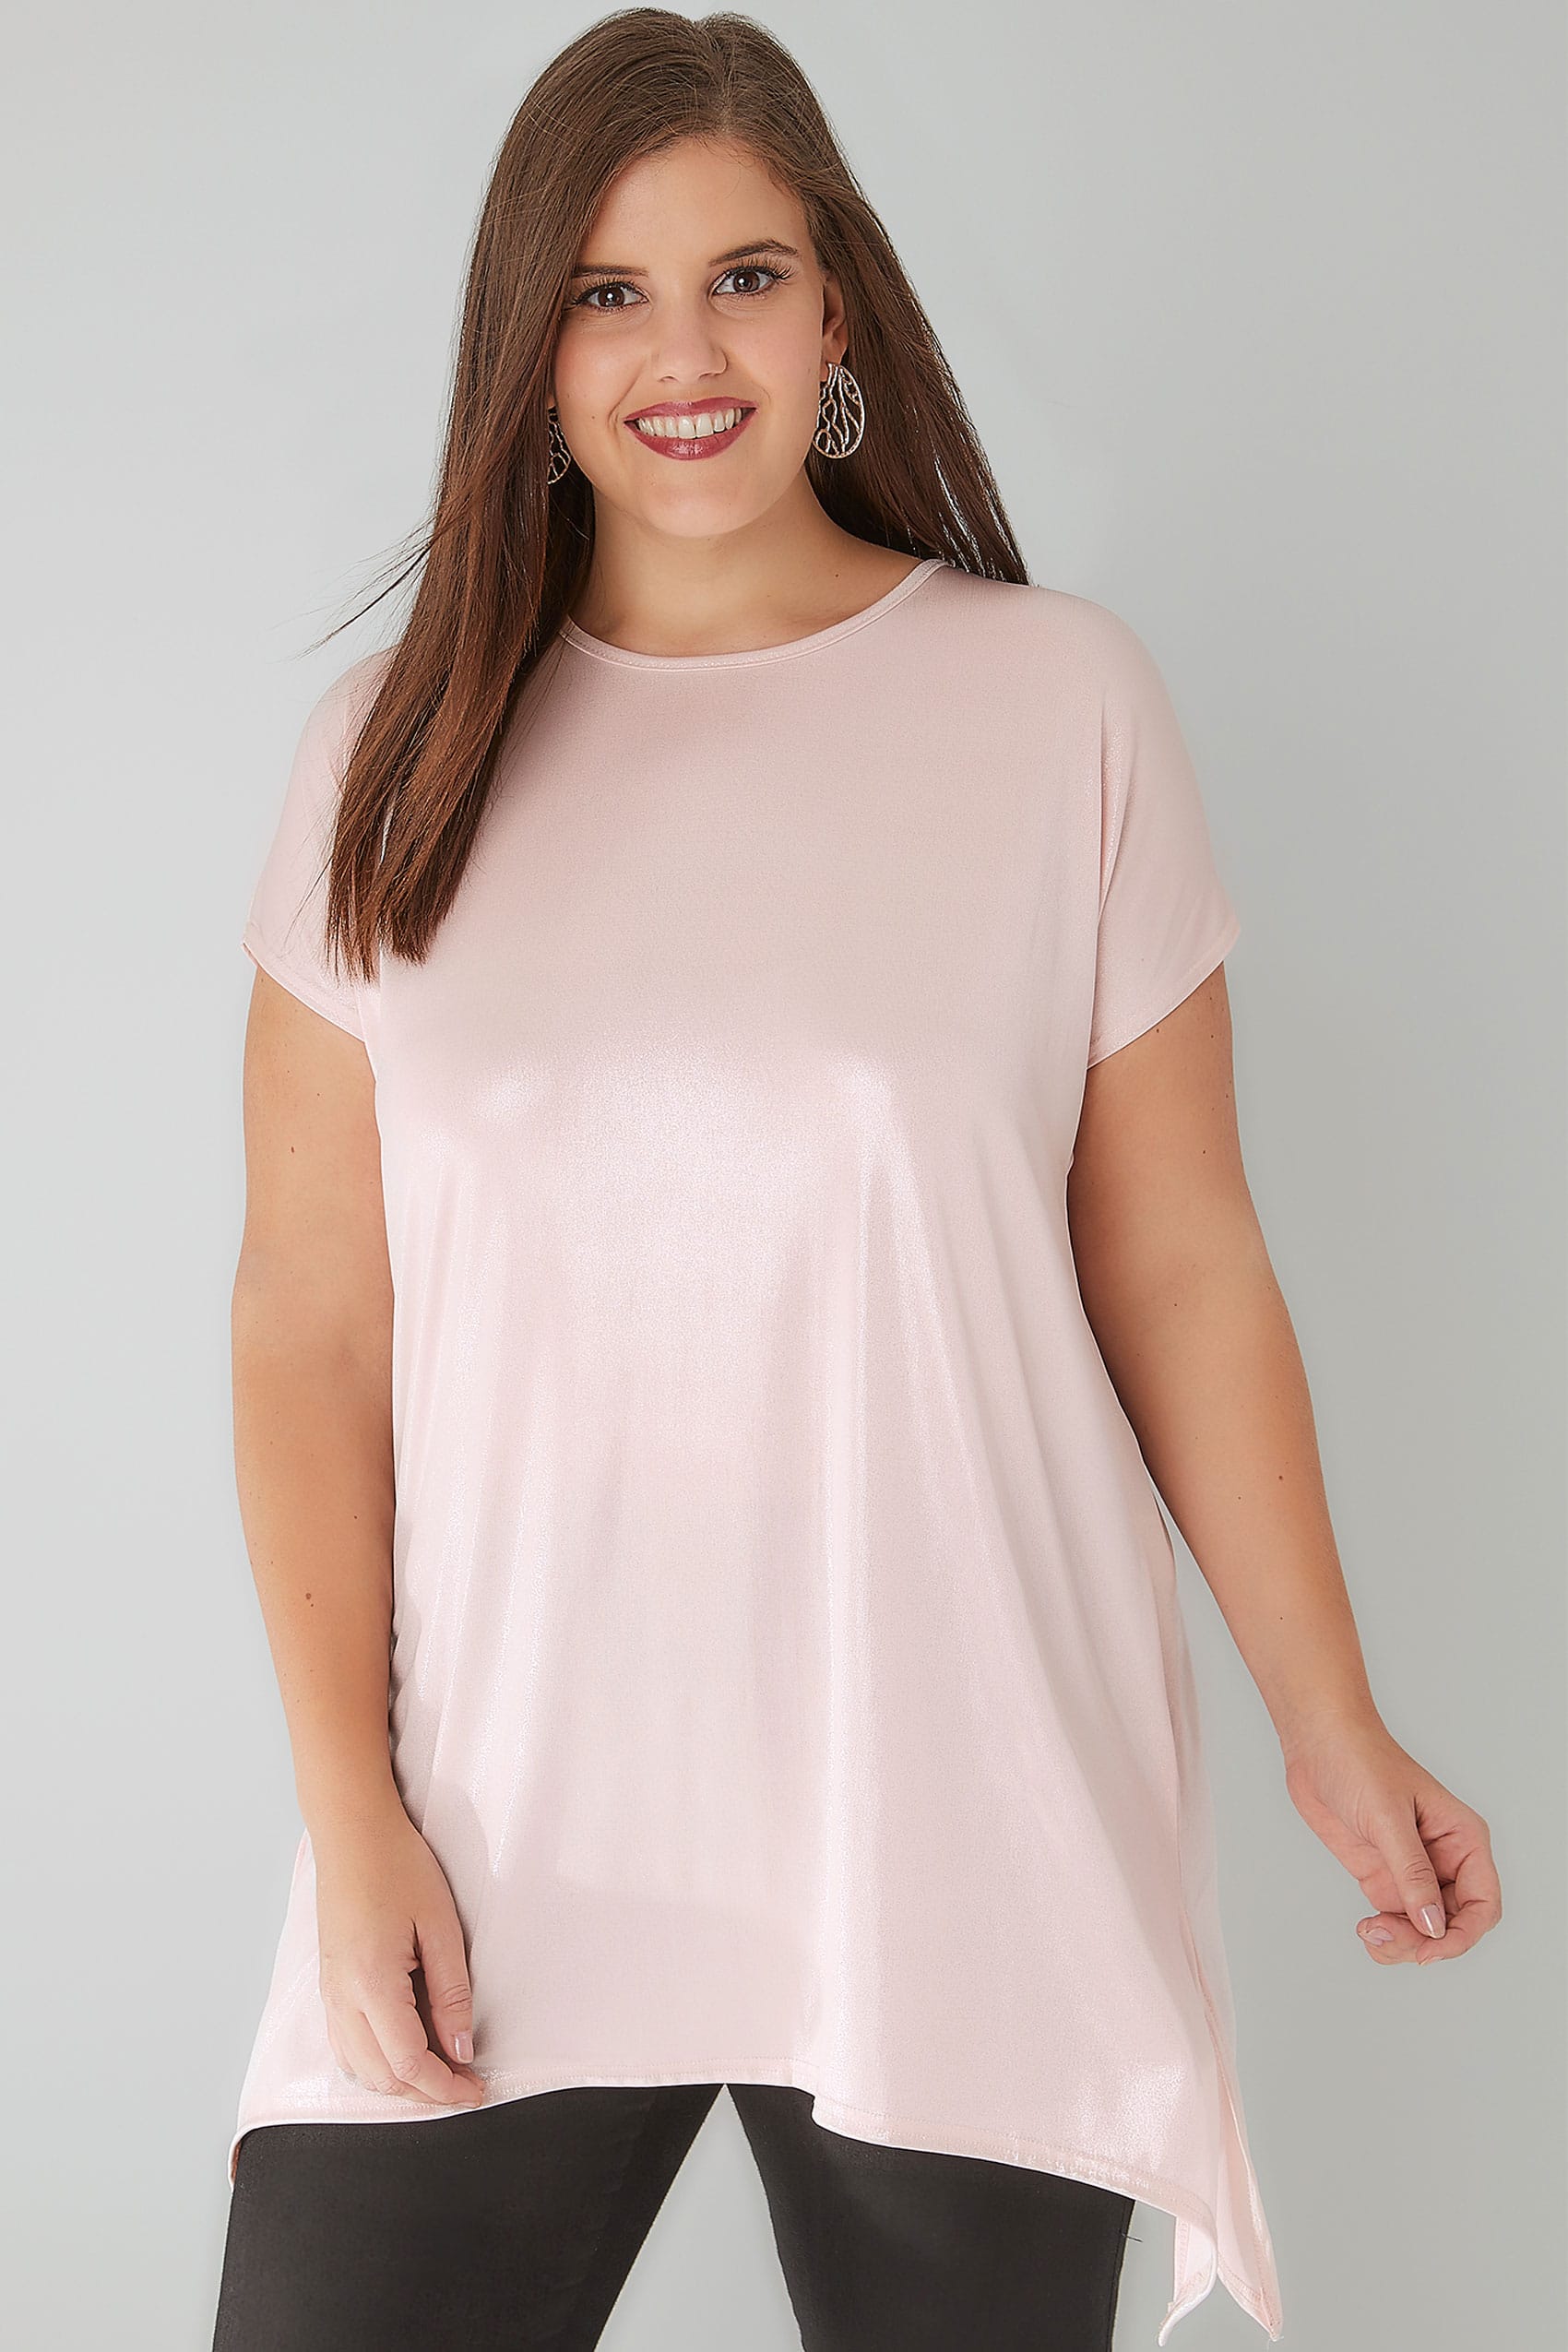 Pink Shimmer Top With Hanky Hem, Plus size 16 to 36